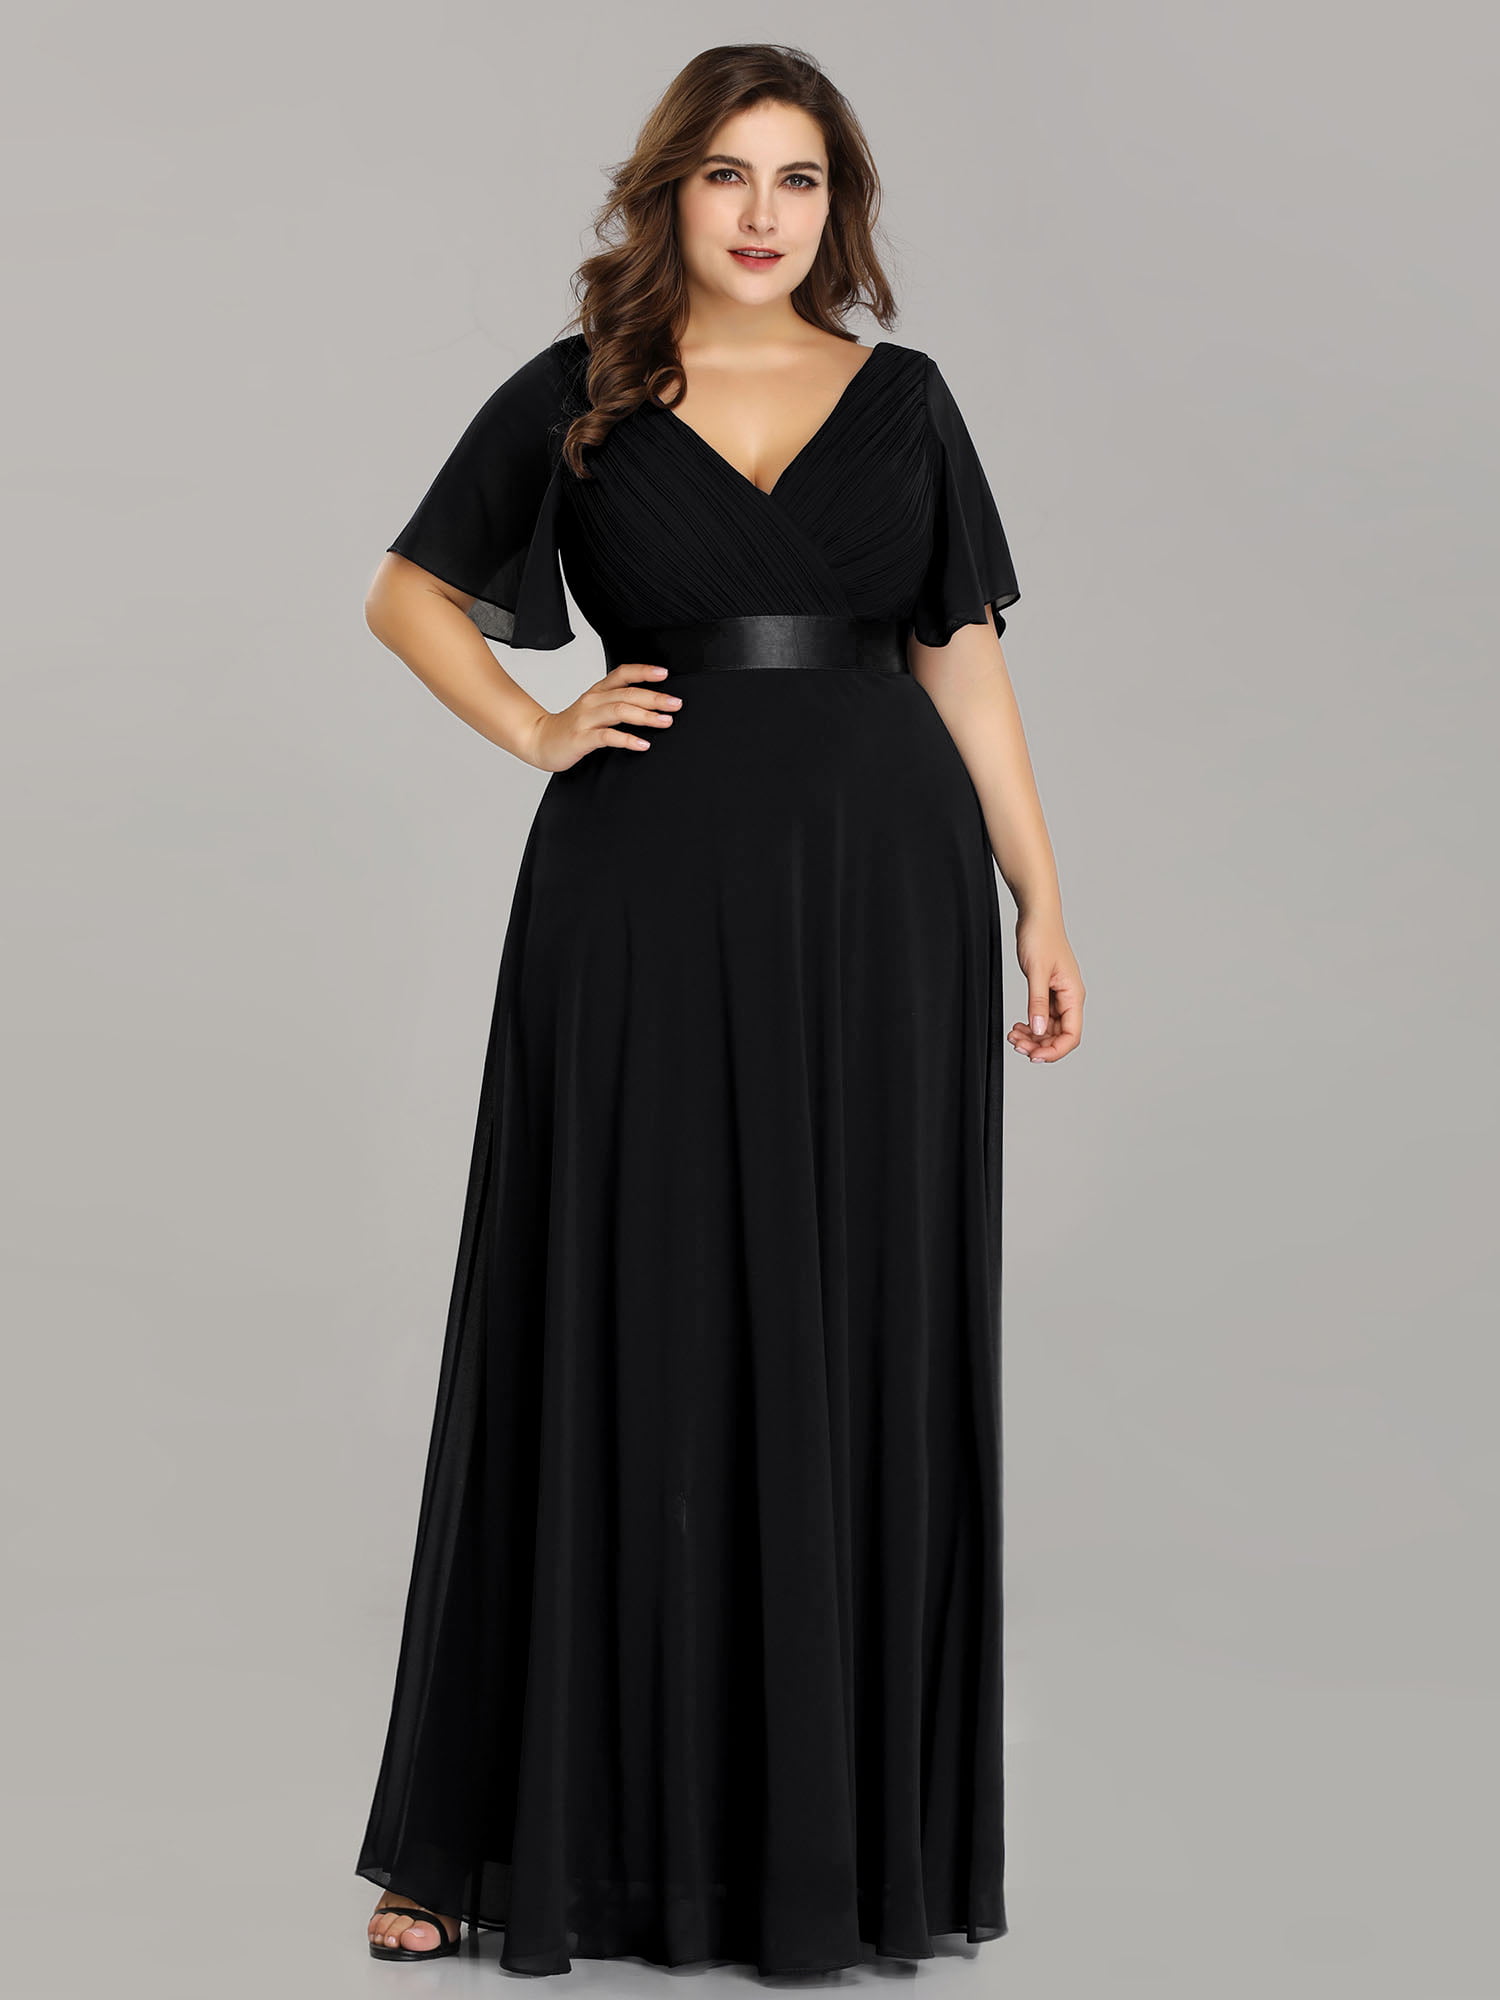 Women’s Casual & Evening Wear-Adelaide South Australia| Chic Maxi Dresses